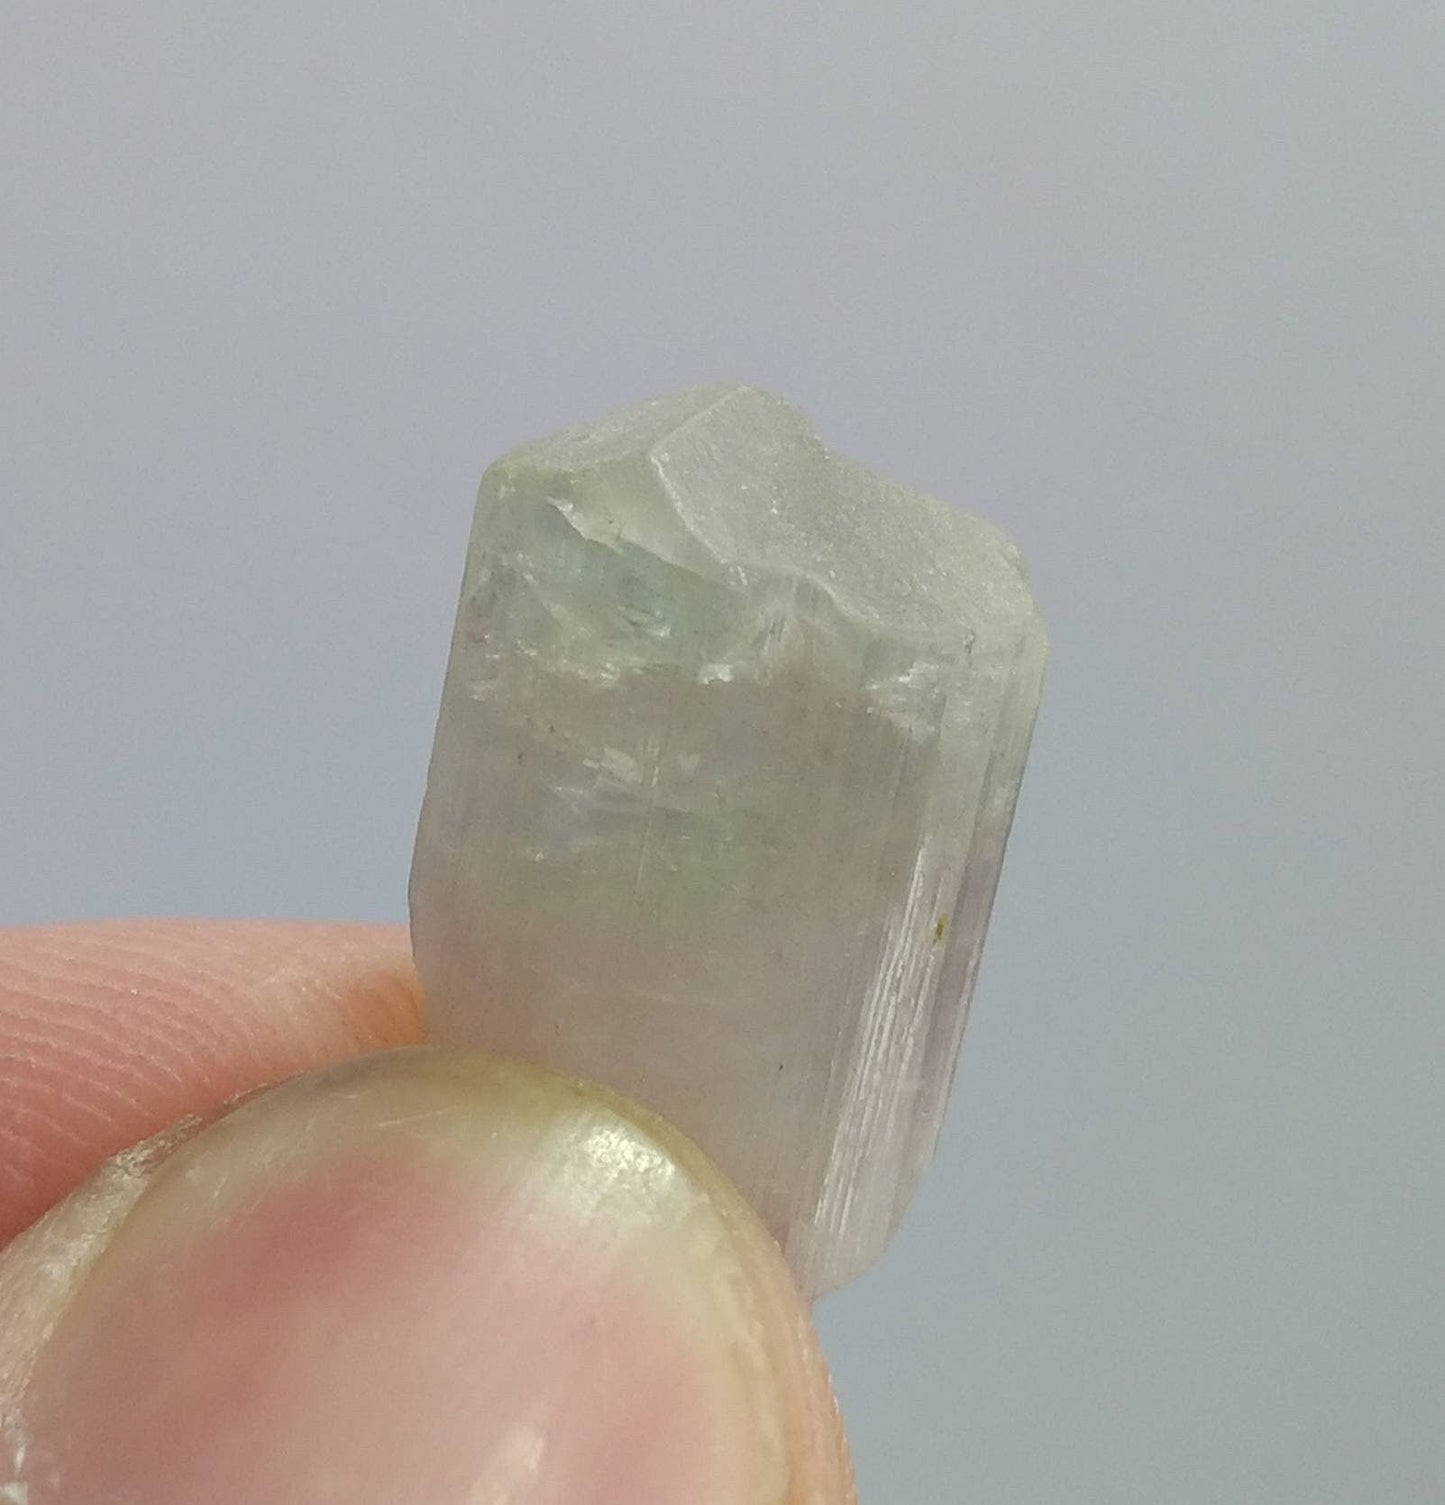 ARSAA GEMS AND MINERALSNatural fine quality beautiful 2.1 gram bicolor Tourmaline crystal - Premium  from ARSAA GEMS AND MINERALS - Just $20.00! Shop now at ARSAA GEMS AND MINERALS